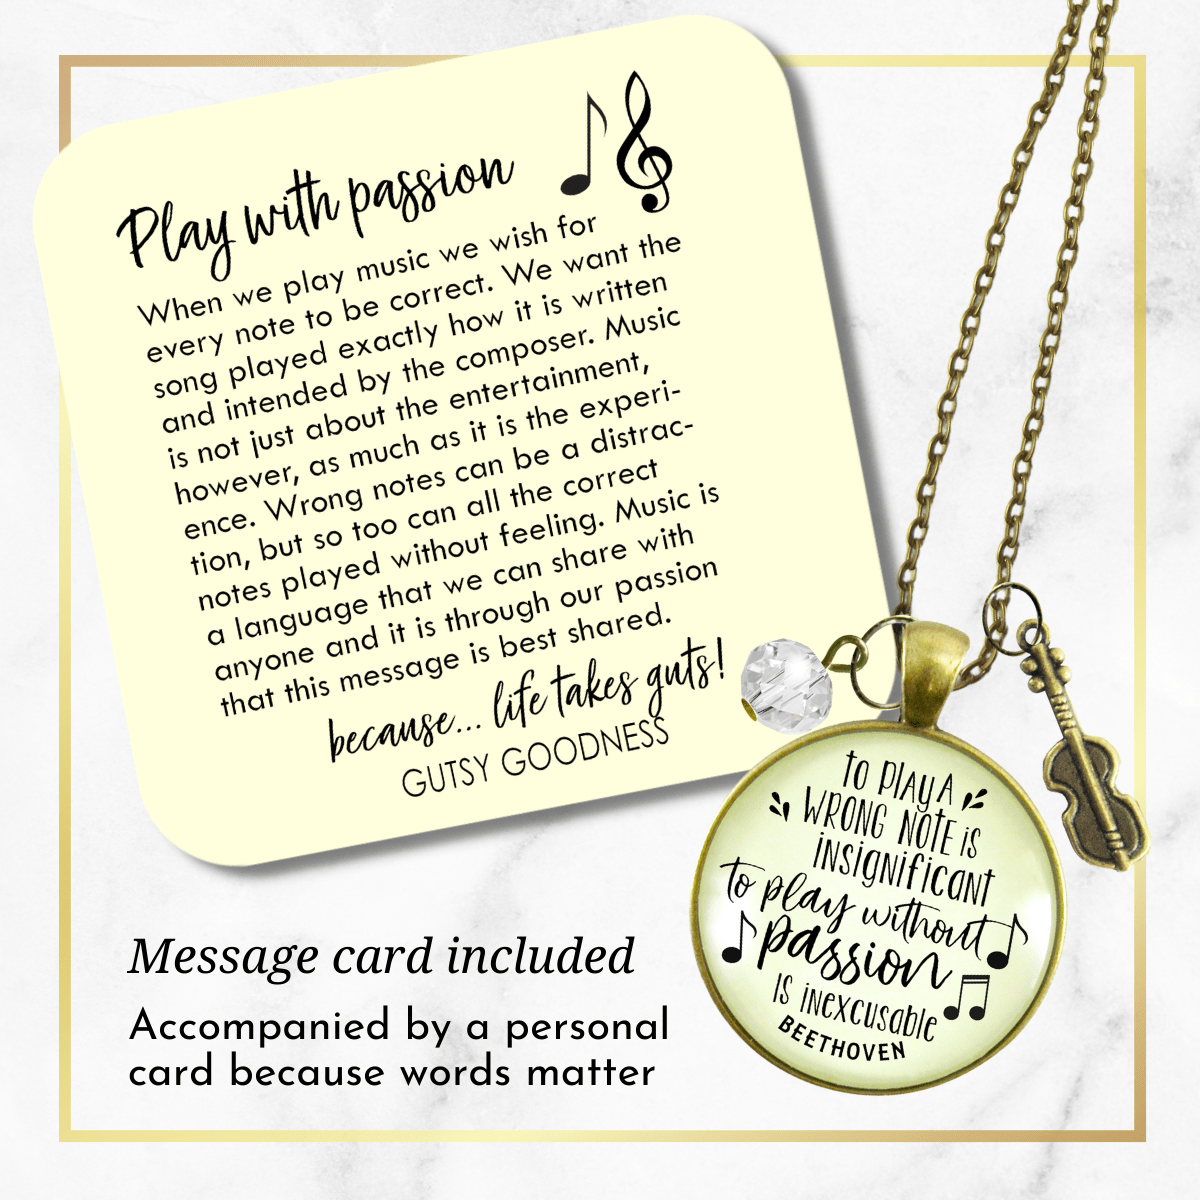 Gutsy Goodness Violin Necklace To Play Wrong Note Beethoven Quote Music Jewelry - Gutsy Goodness Handmade Jewelry;Violin Necklace To Play Wrong Note Beethoven Quote Music Jewelry - Gutsy Goodness Handmade Jewelry Gifts